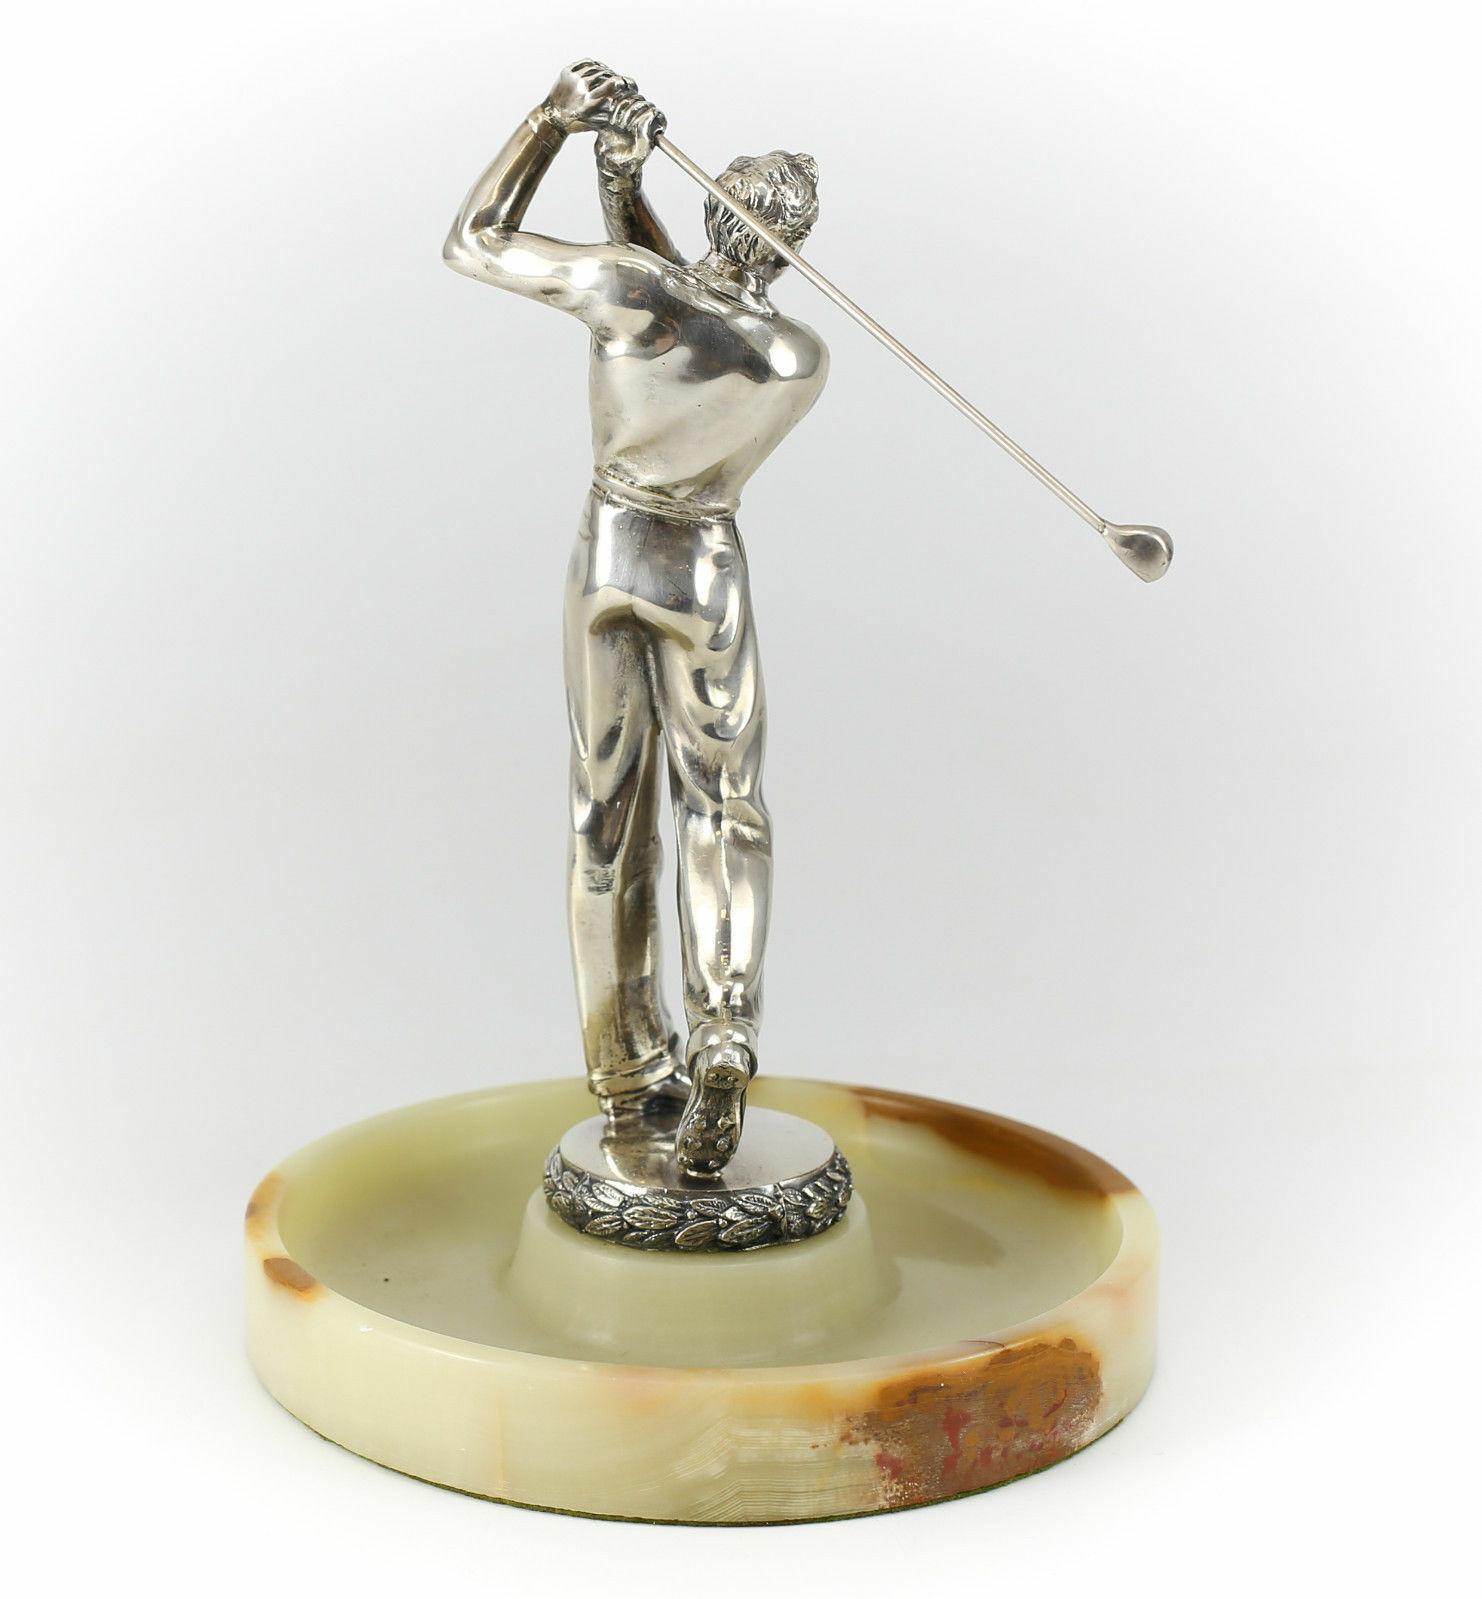 American Hand Chased Silverplate Golf Figurine Desk Caddy Marble Base, c1930

Additional Information:
Composition: Silverplate 
Age: circa 1930
Dimension: 7 inches diameter, 9.5 inches Height
Condition: Very Good Condition. Some oxidation &